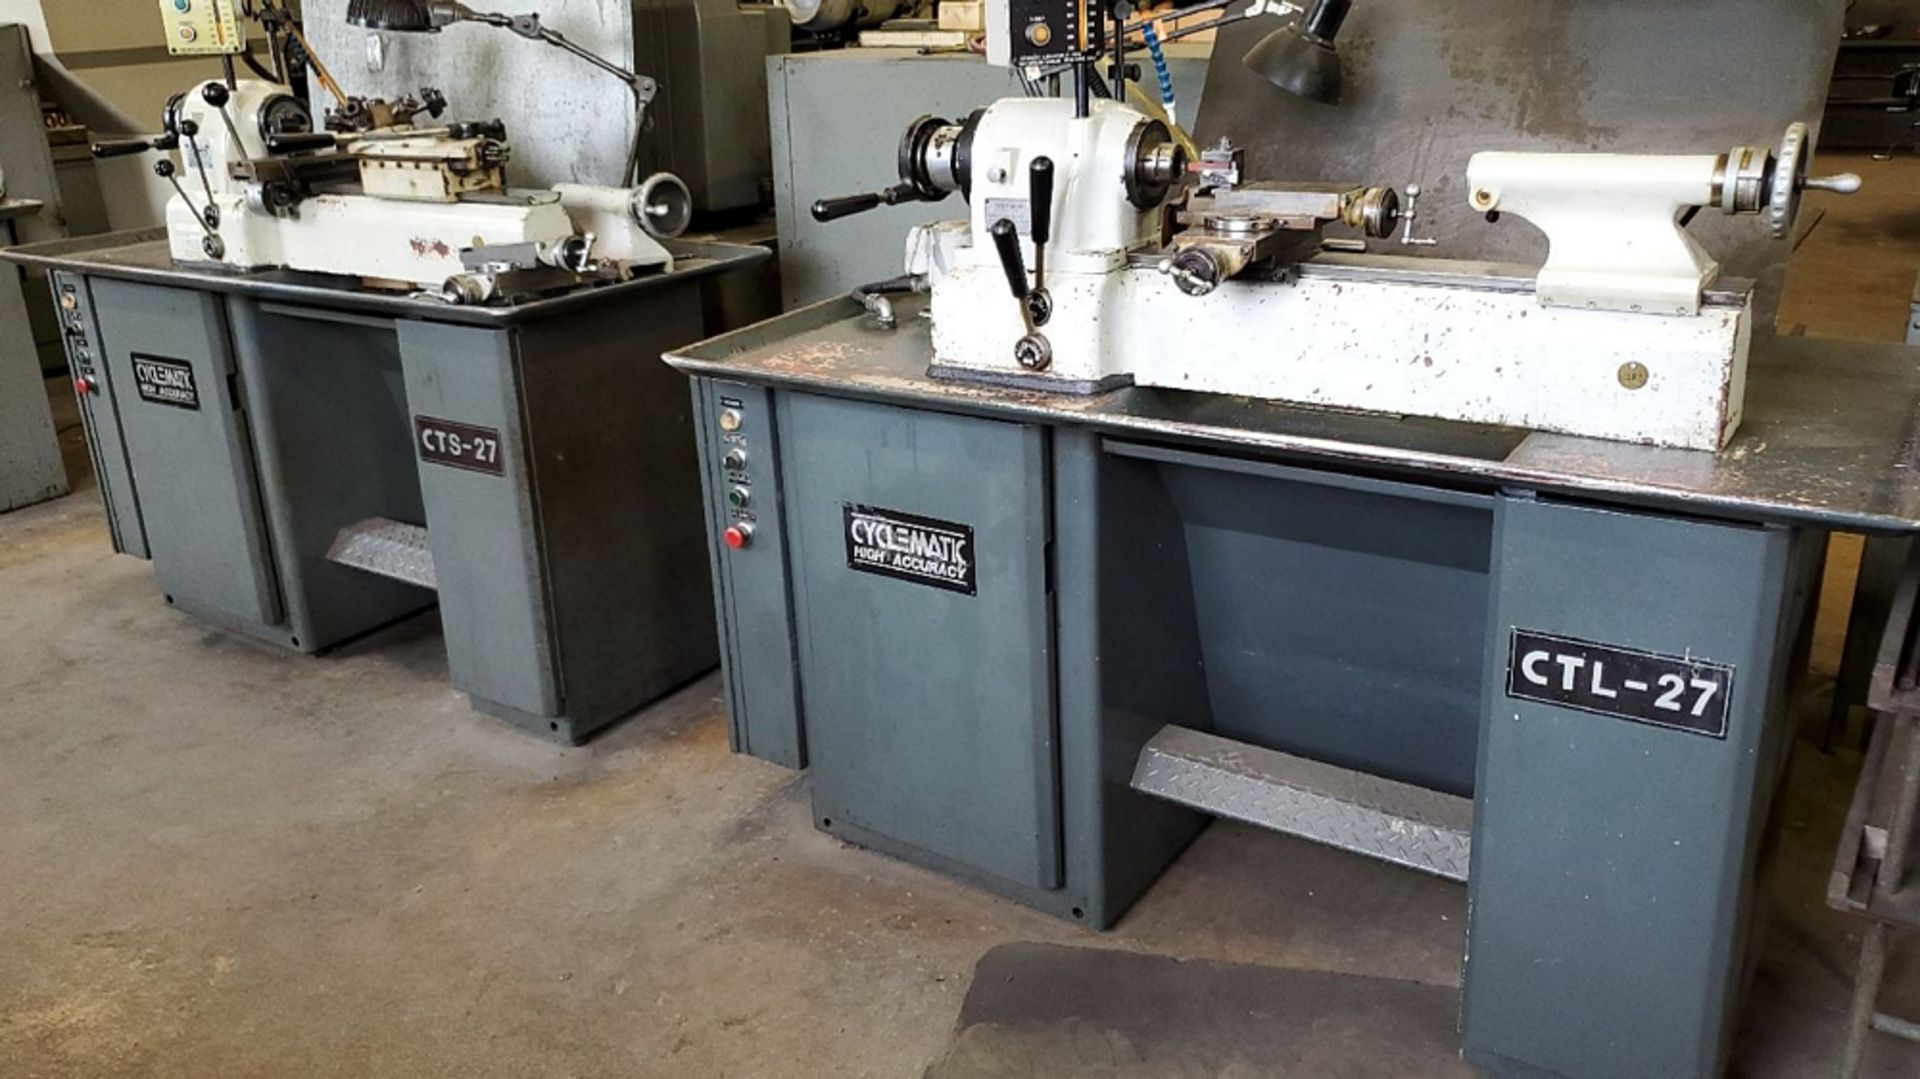 Cyclematic Model CTS-27 9" Tool Room Turret Lathe